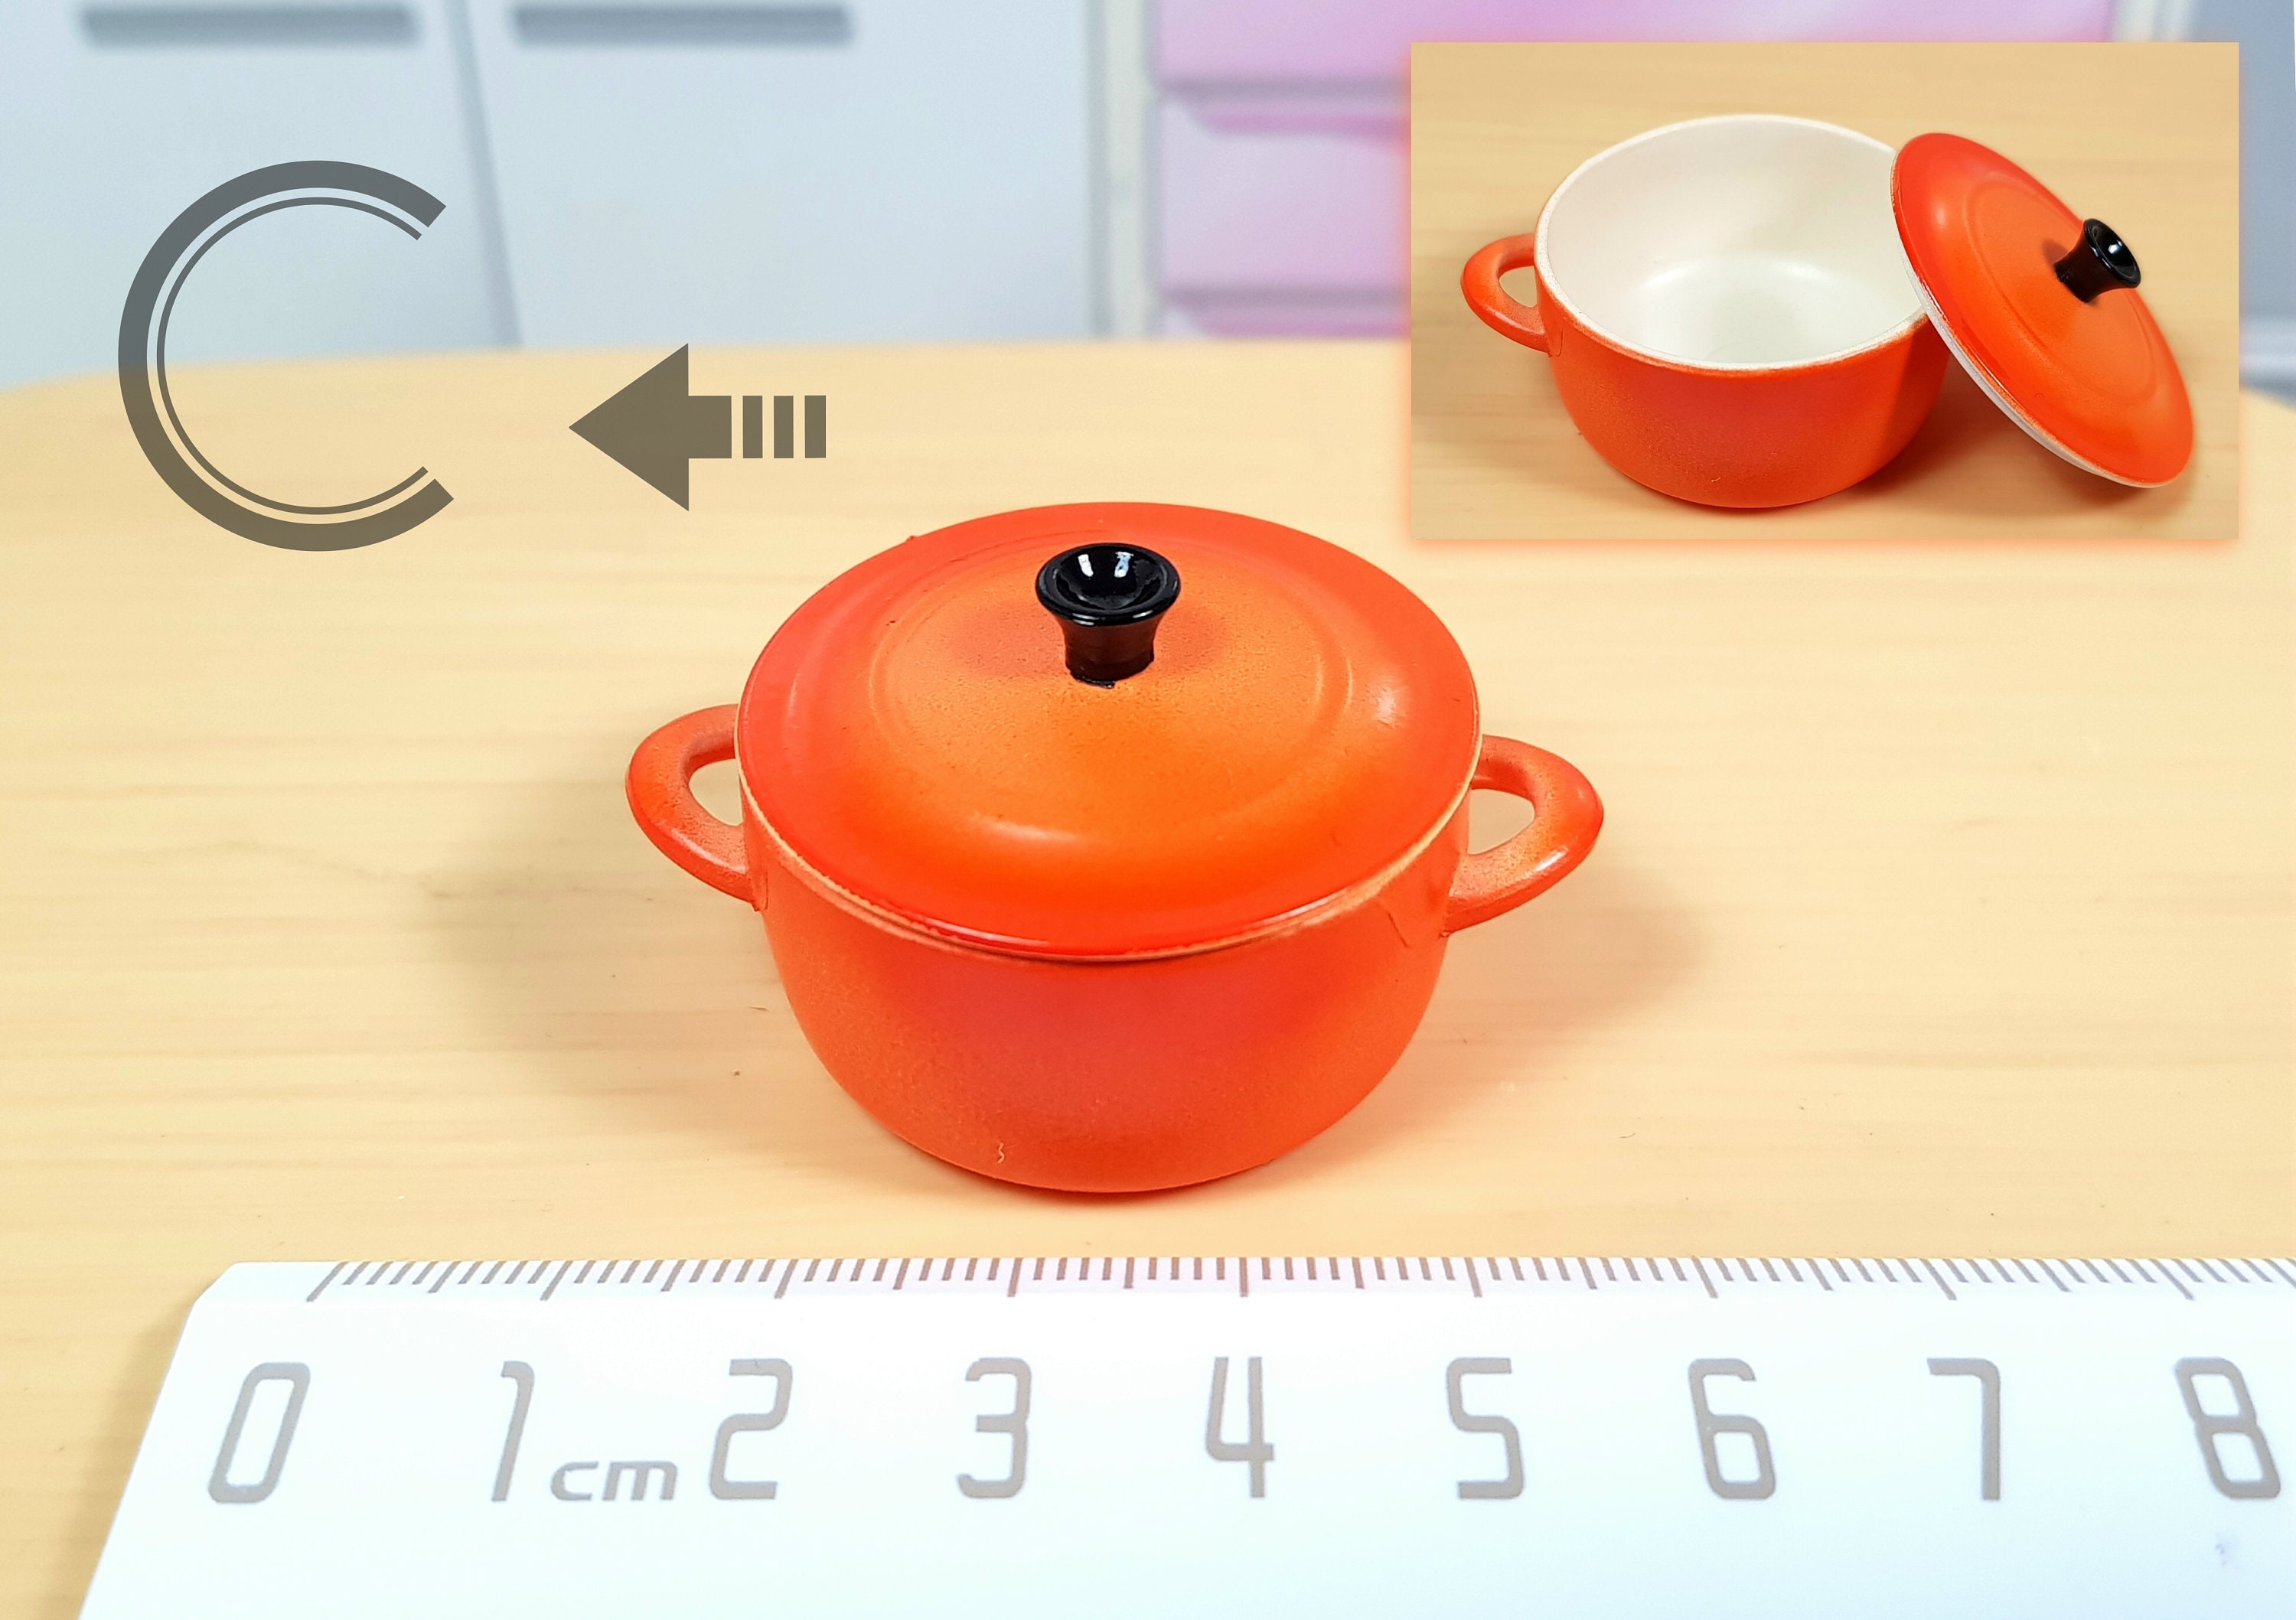 1/6 Scale Re-ment Dollhouse Miniature Kitchen Accessories cooking Pot,  Oven, Cut Board, Containers, Cups W/holder, Chopstick Stand, Bowl. 